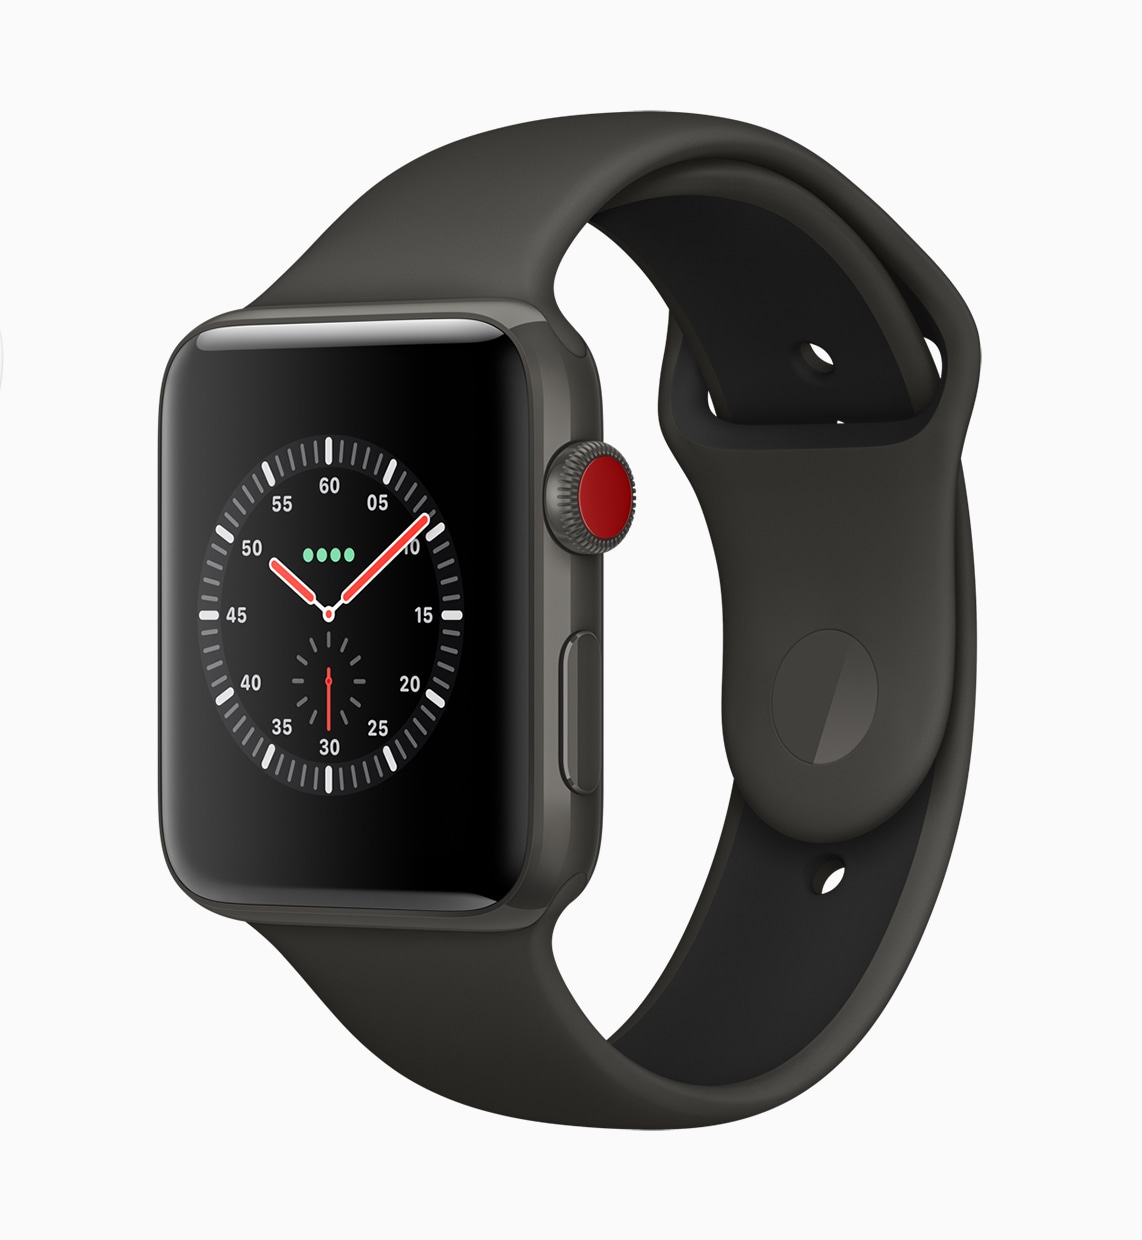 Apple Watch Series 3 with red Digital Crown and cellular connectivity